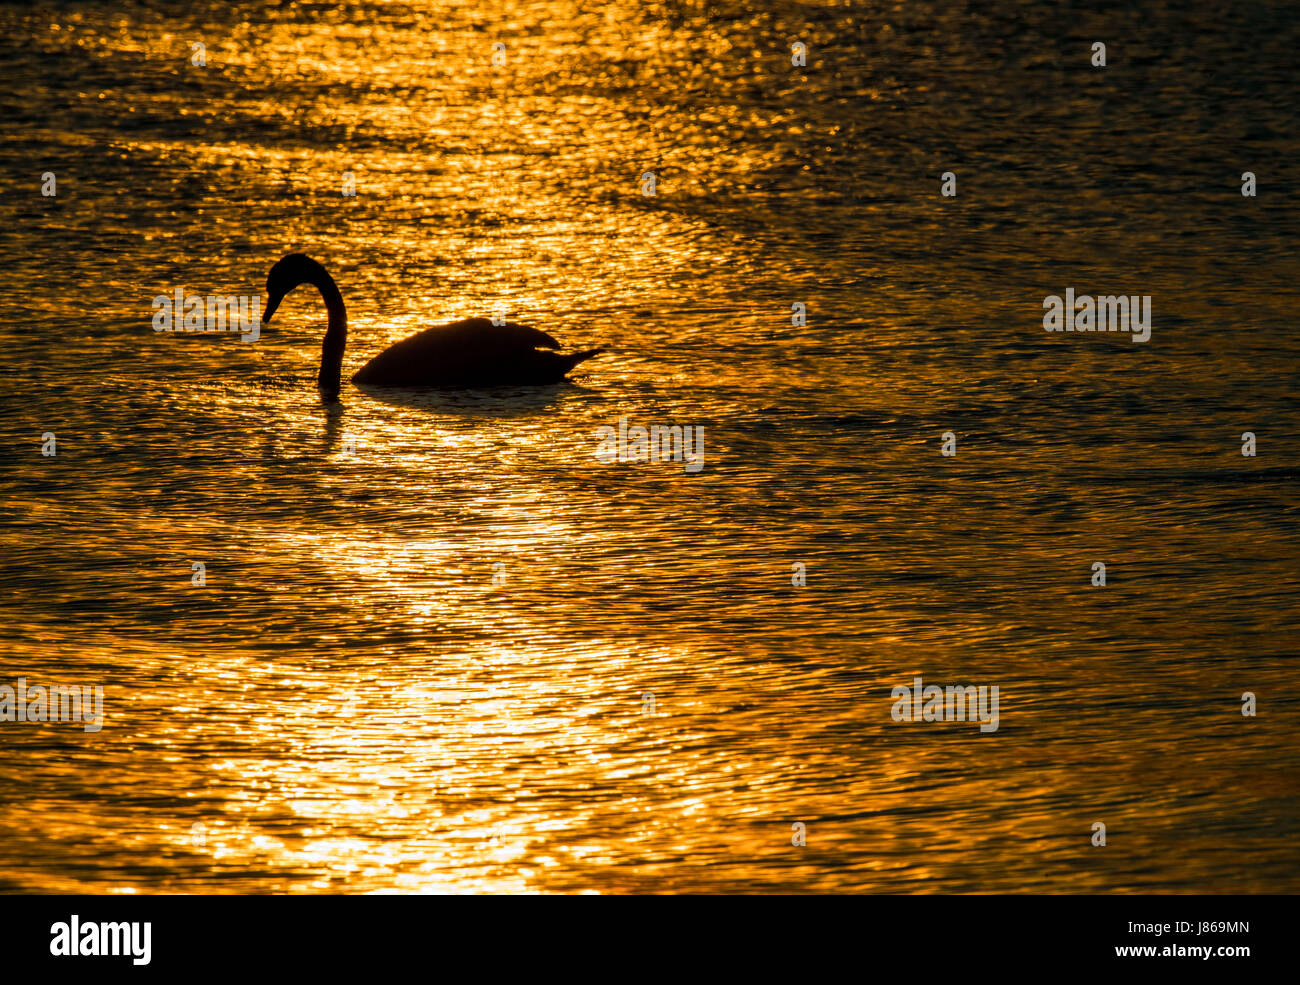 A swan swims on the sea during sunset close to Neu Reddevitz on the Baltic island Ruegen, Germany, 18 May 2017. Ruegen is the largest and most populous German island with 77.000 inhabitants. Photo: Jens Büttner/dpa-Zentralbild/ZB Stock Photo